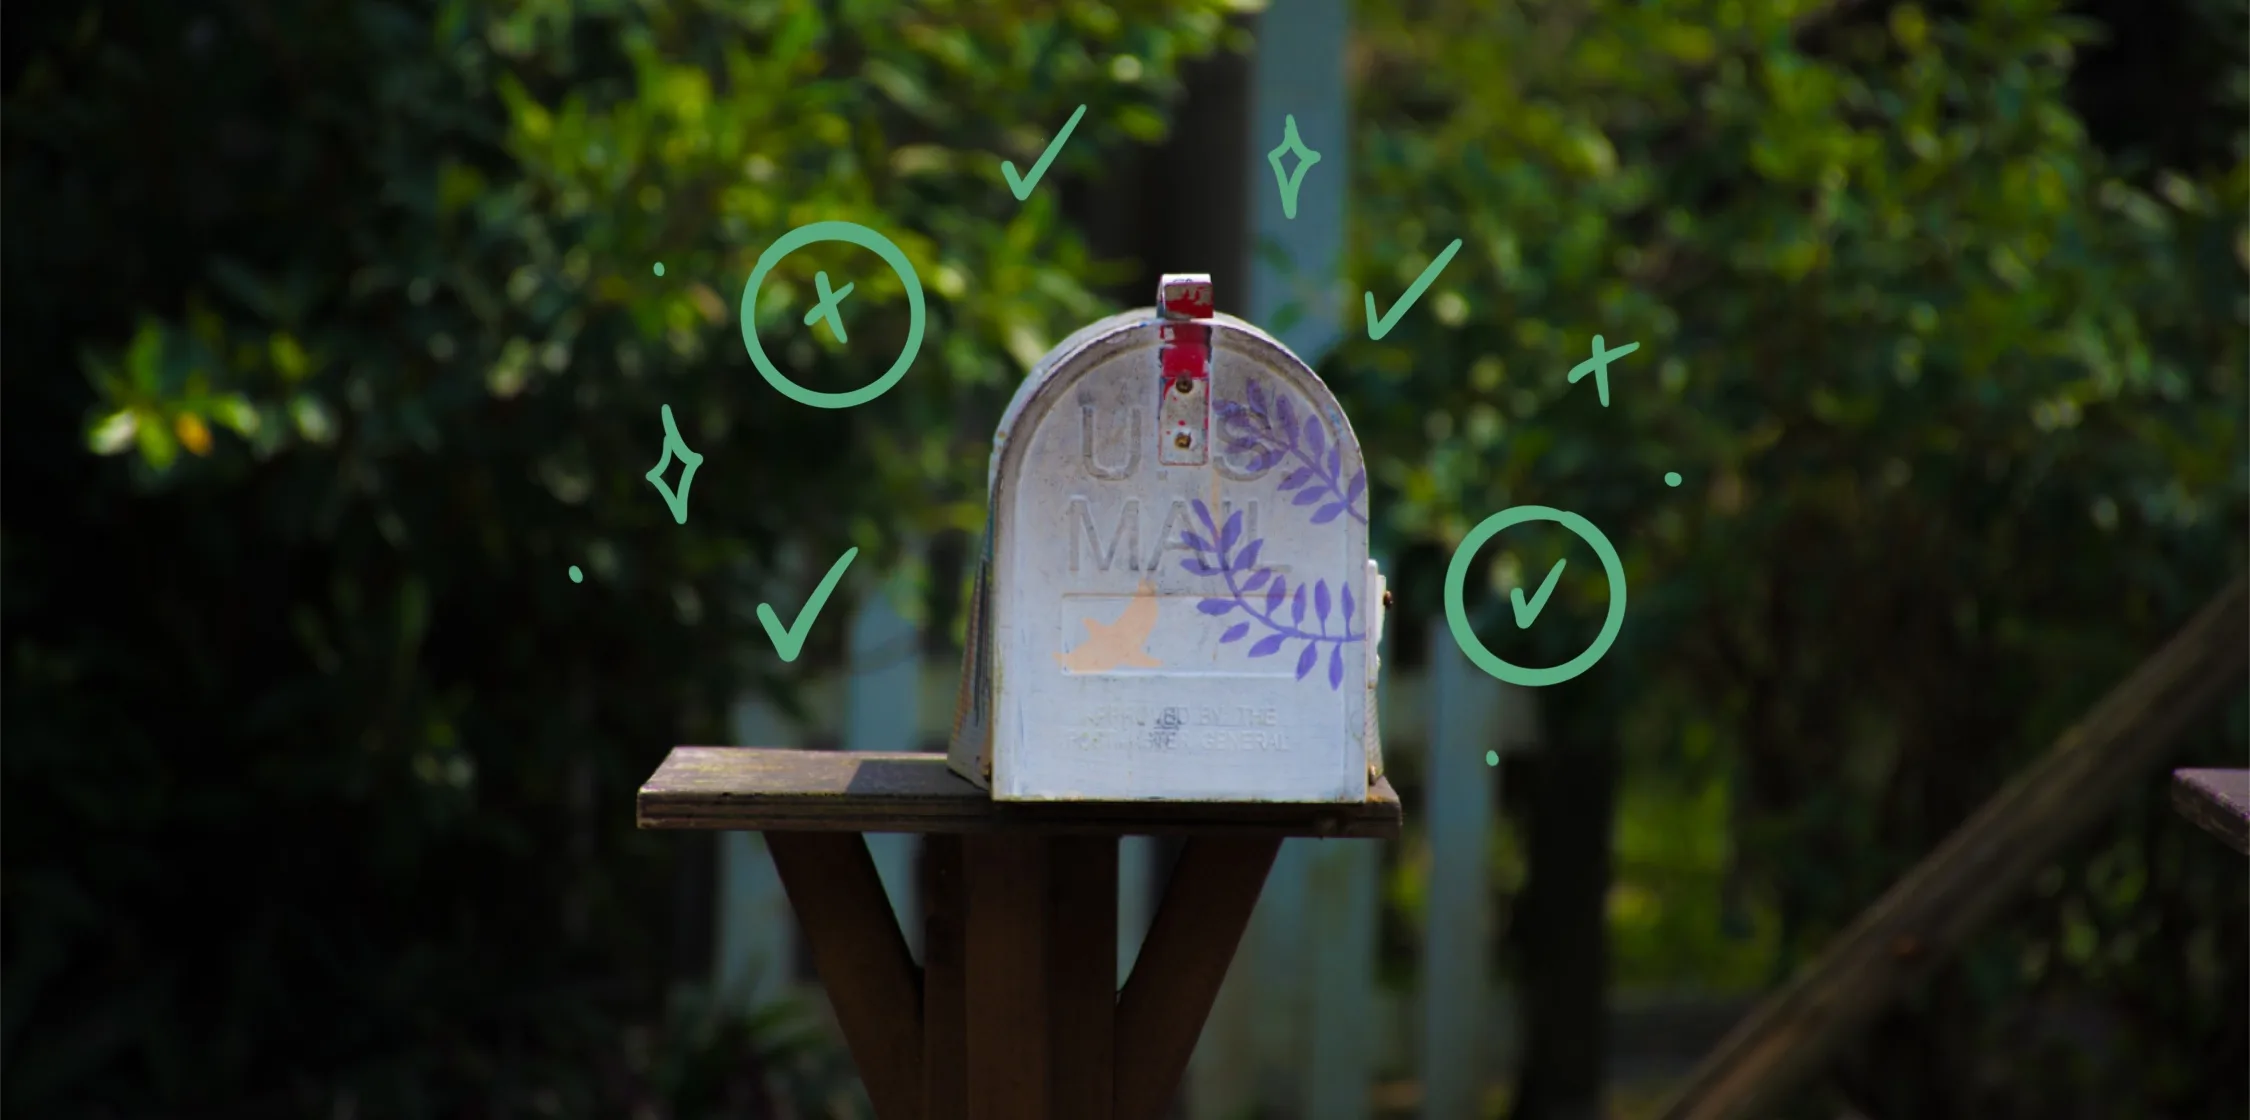 Email Marketer's Guide: What You Need to Know about Yahoo